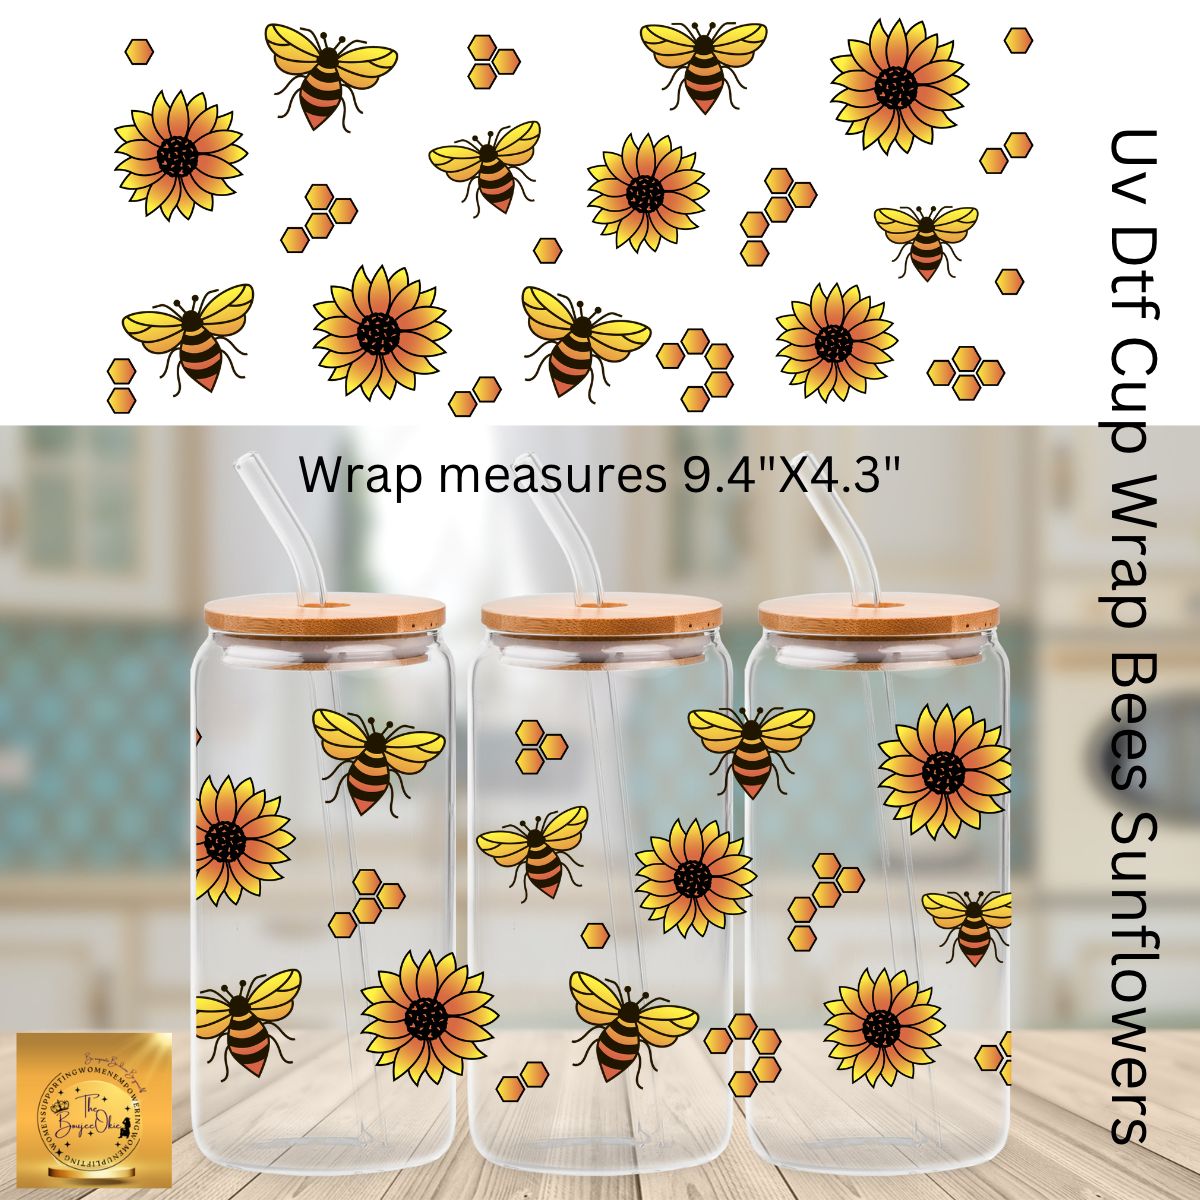 Uv Dtf Wrap Sunflowers and Bees